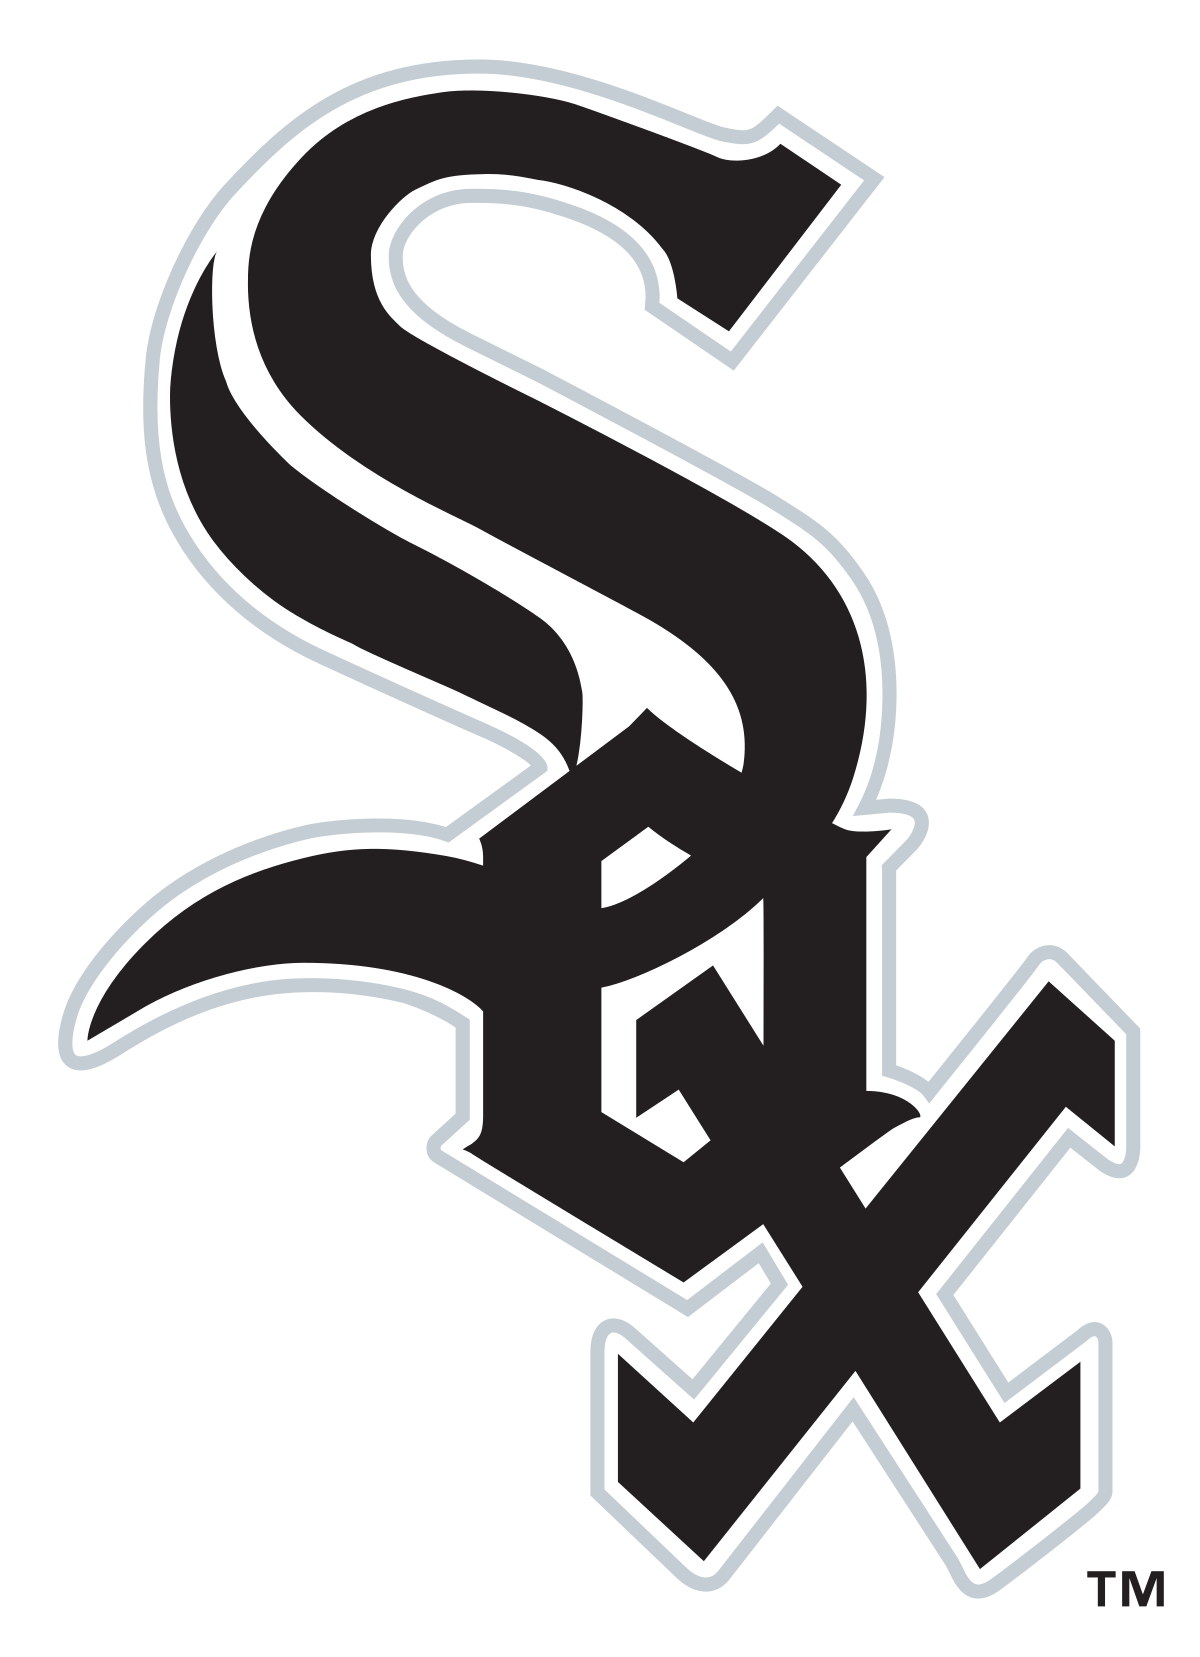 chicago white sox uniform with shorts